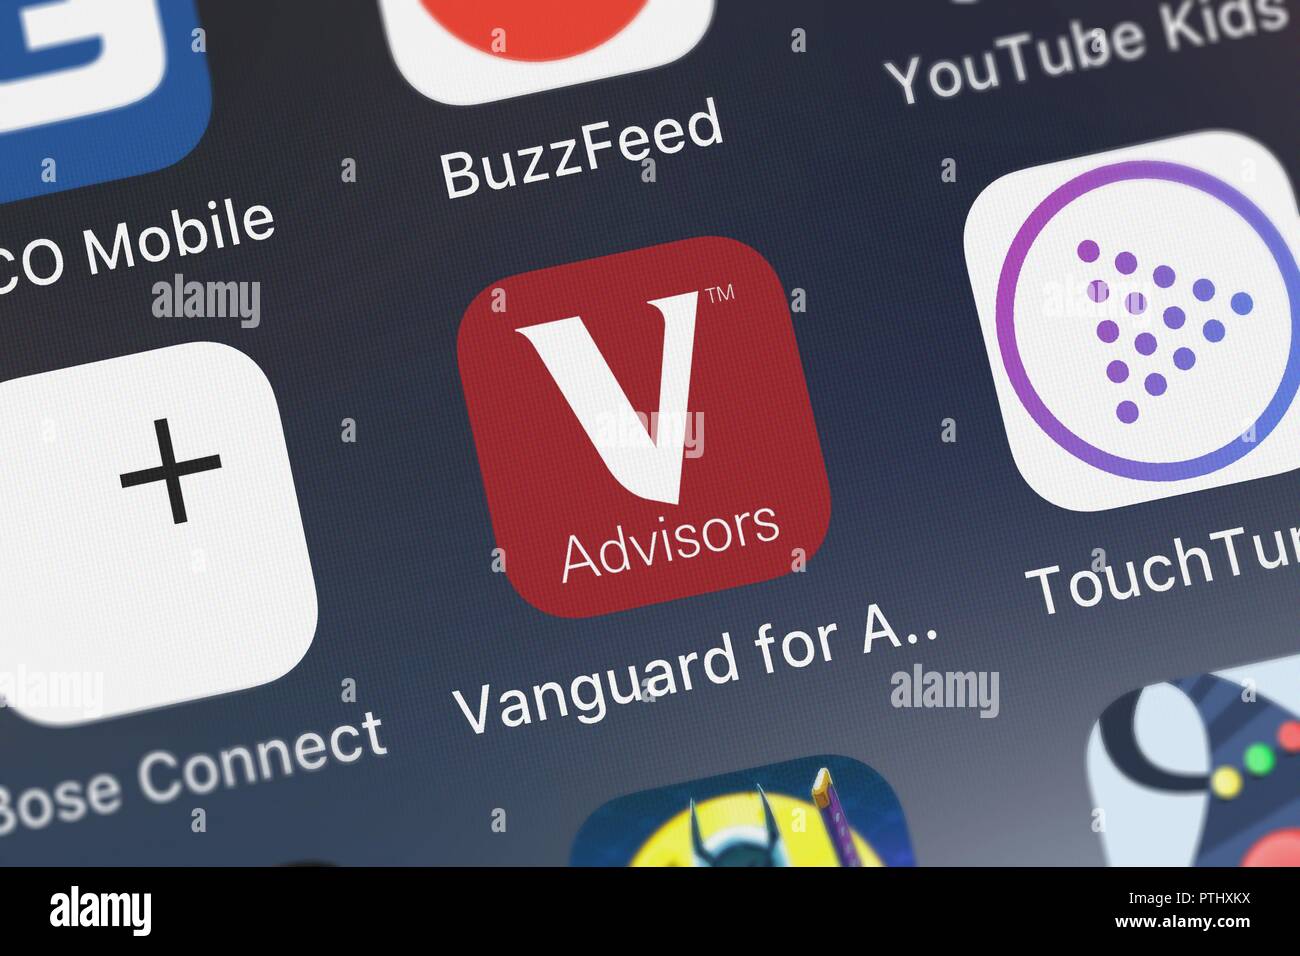 London, United Kingdom - October 09, 2018: Close-up shot of the Vanguard for Advisors application icon from The Vanguard Group, Inc. on an iPhone. Stock Photo